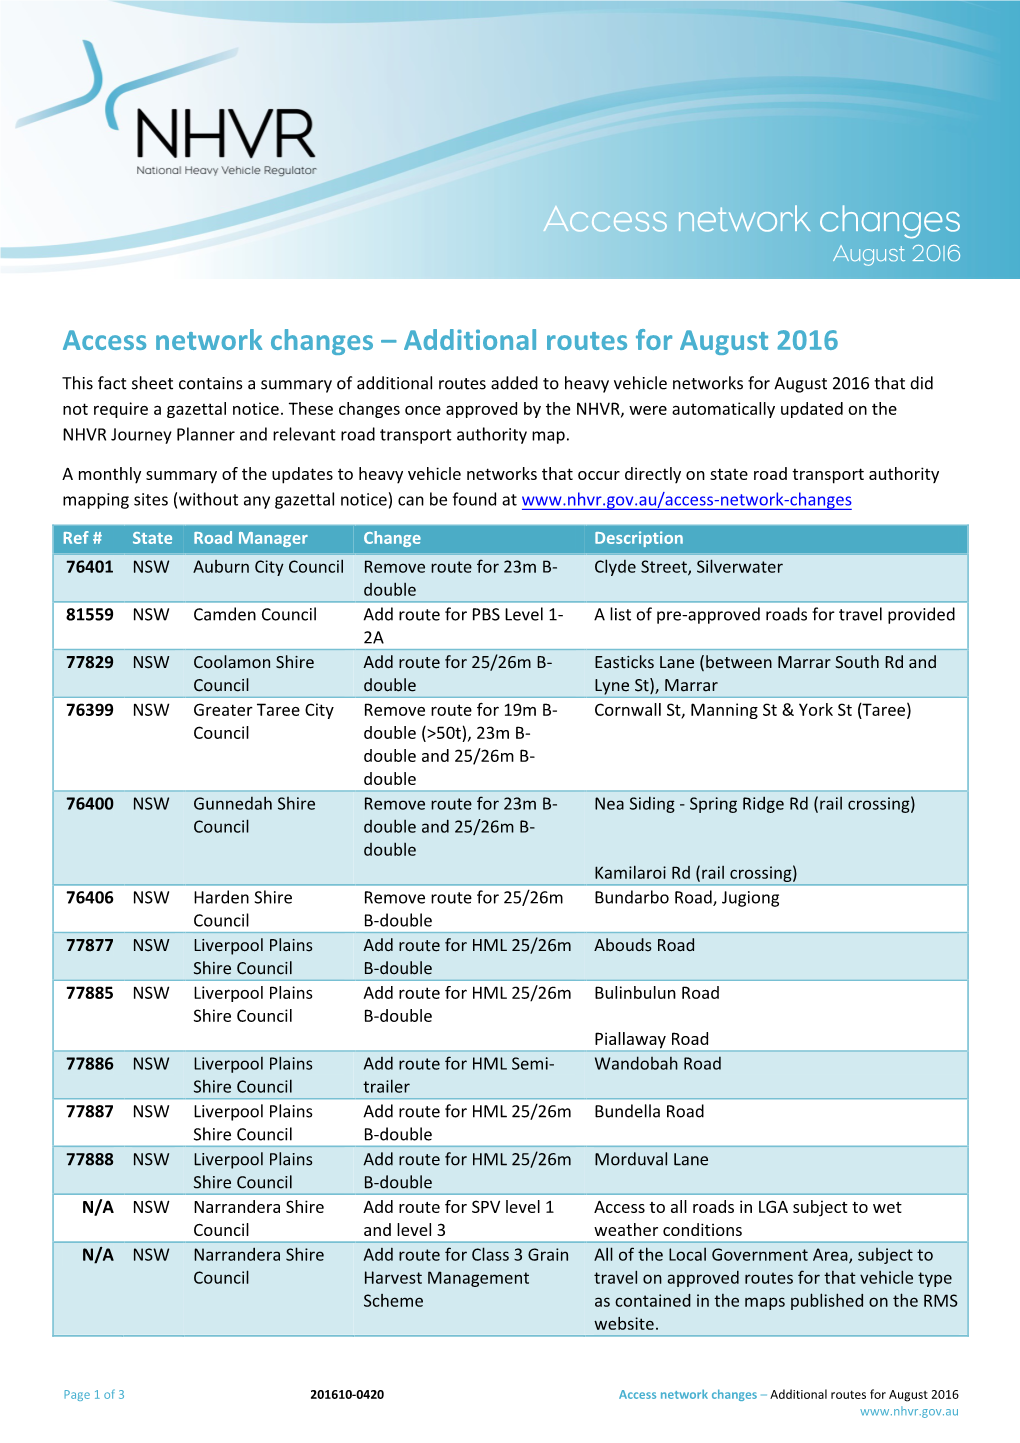 Access Network Changes August 2016